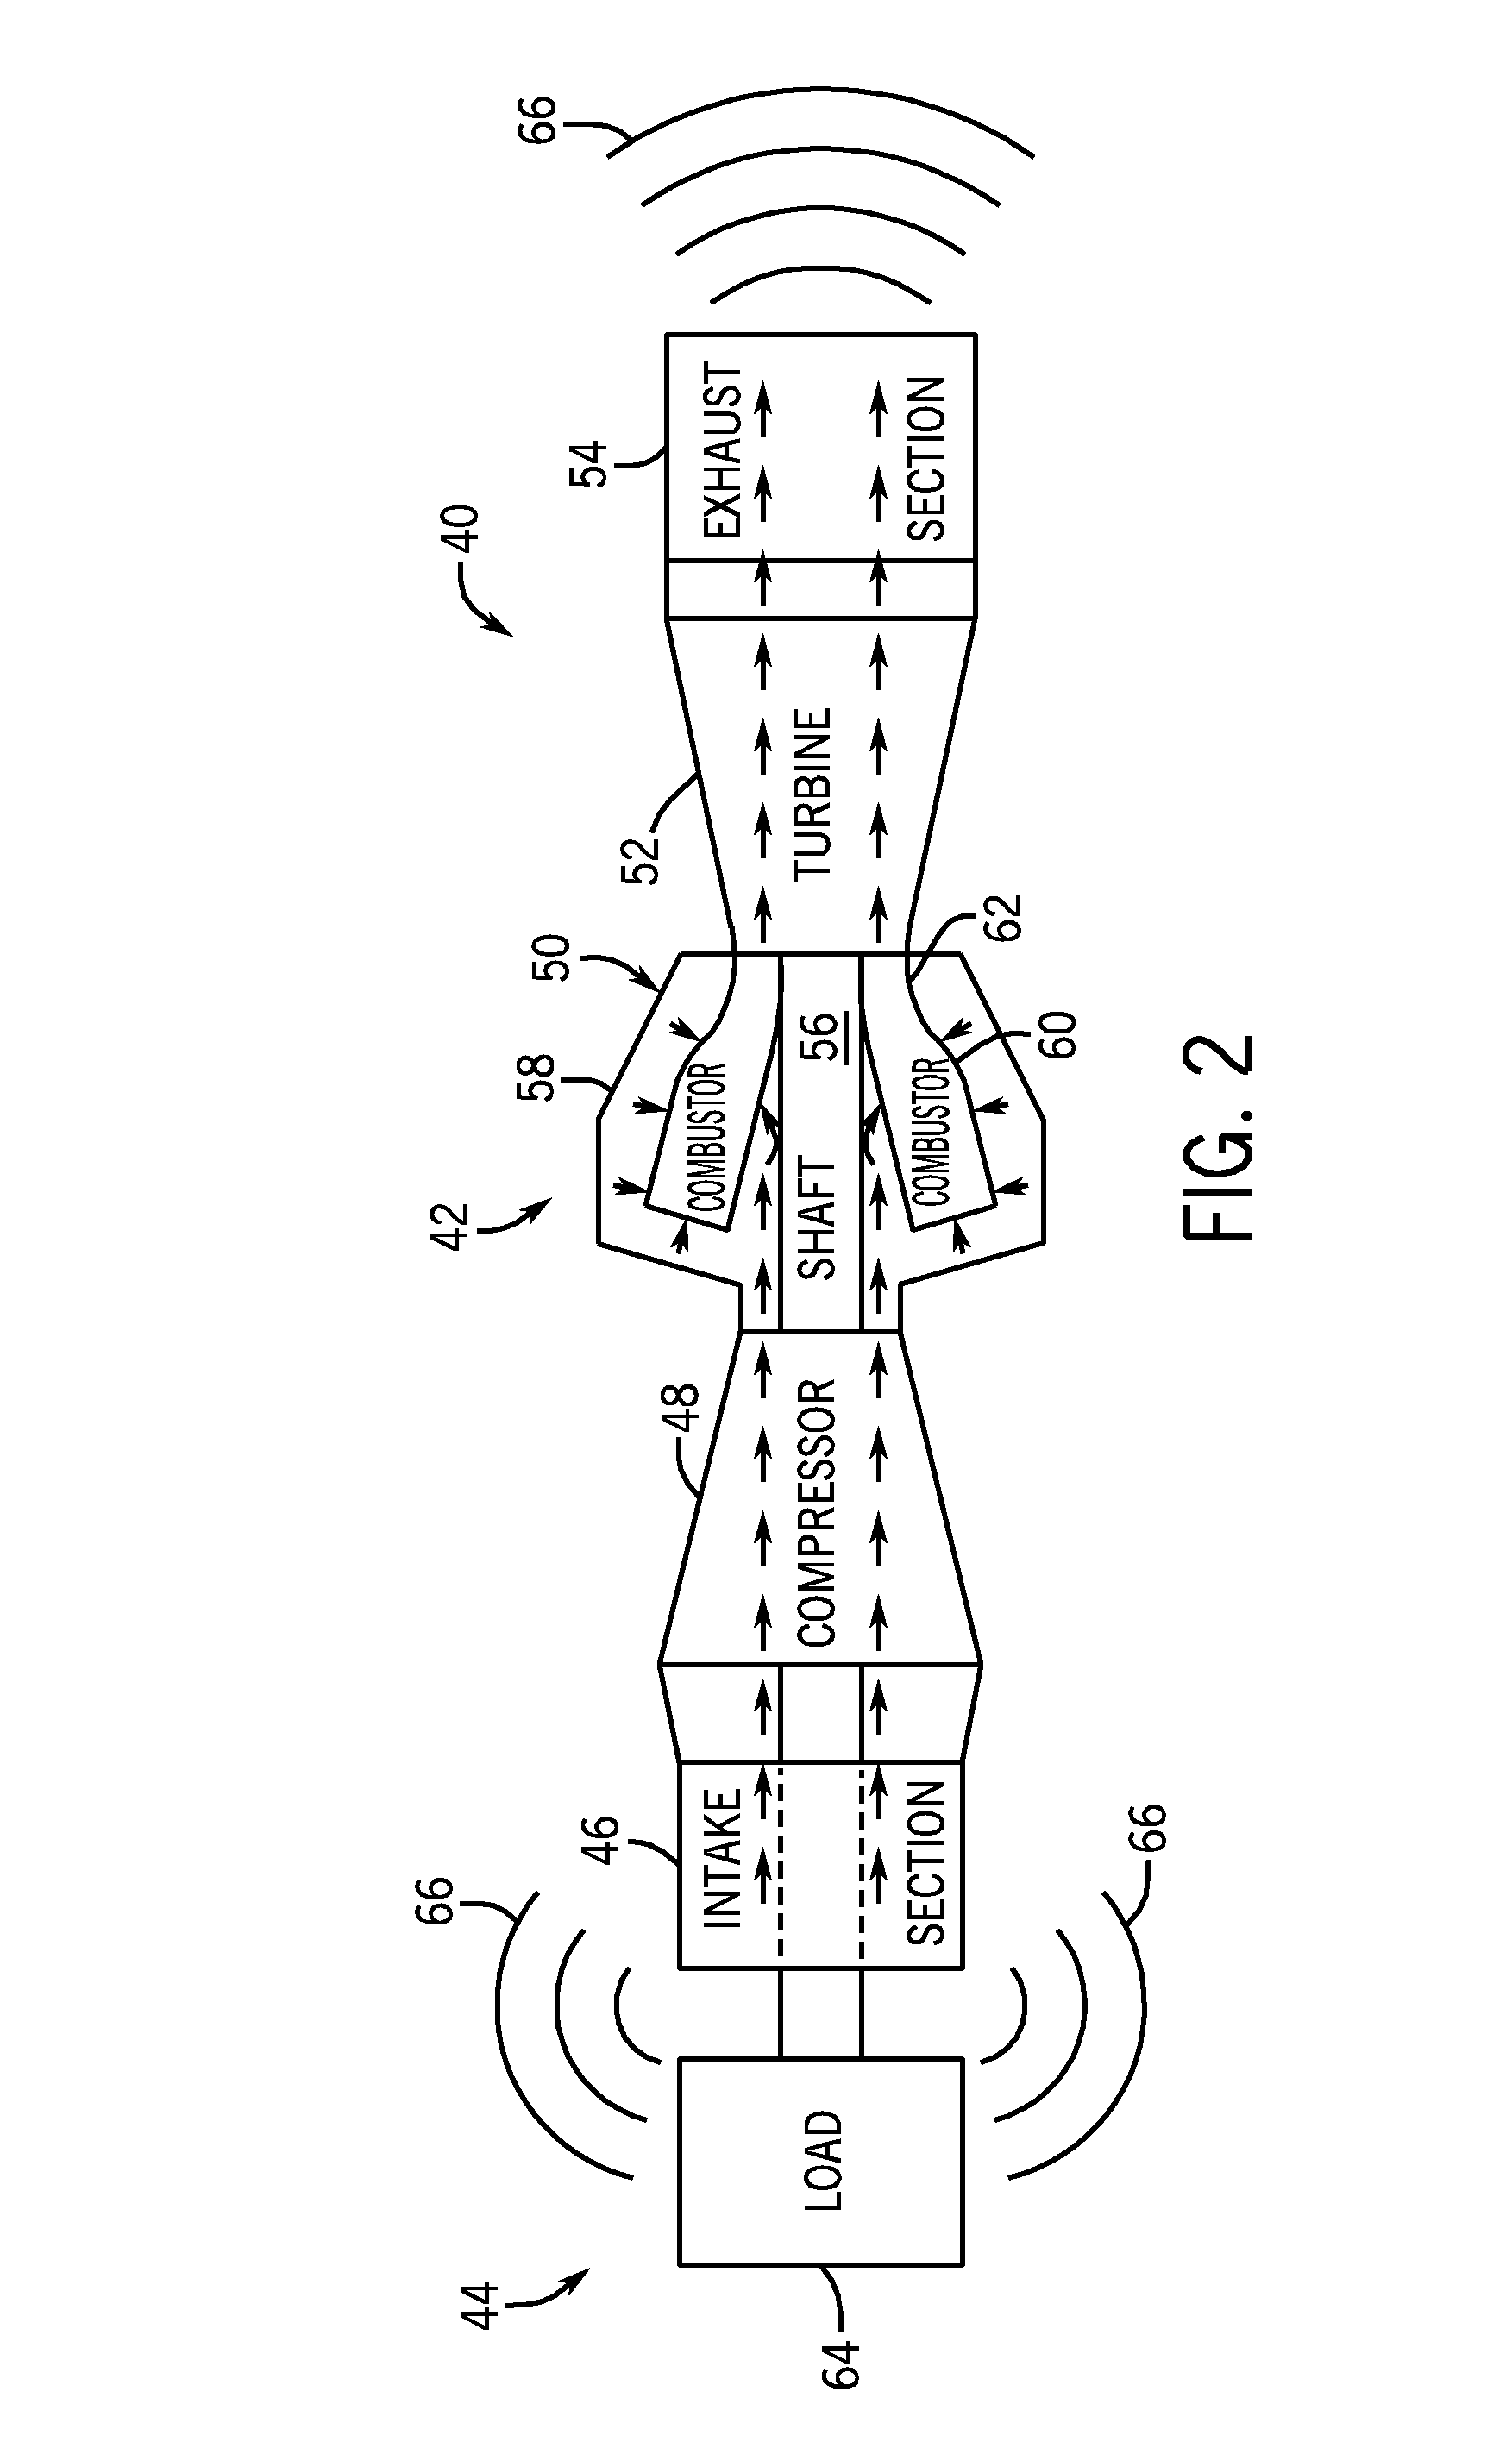 Sound attenuation systems and methods